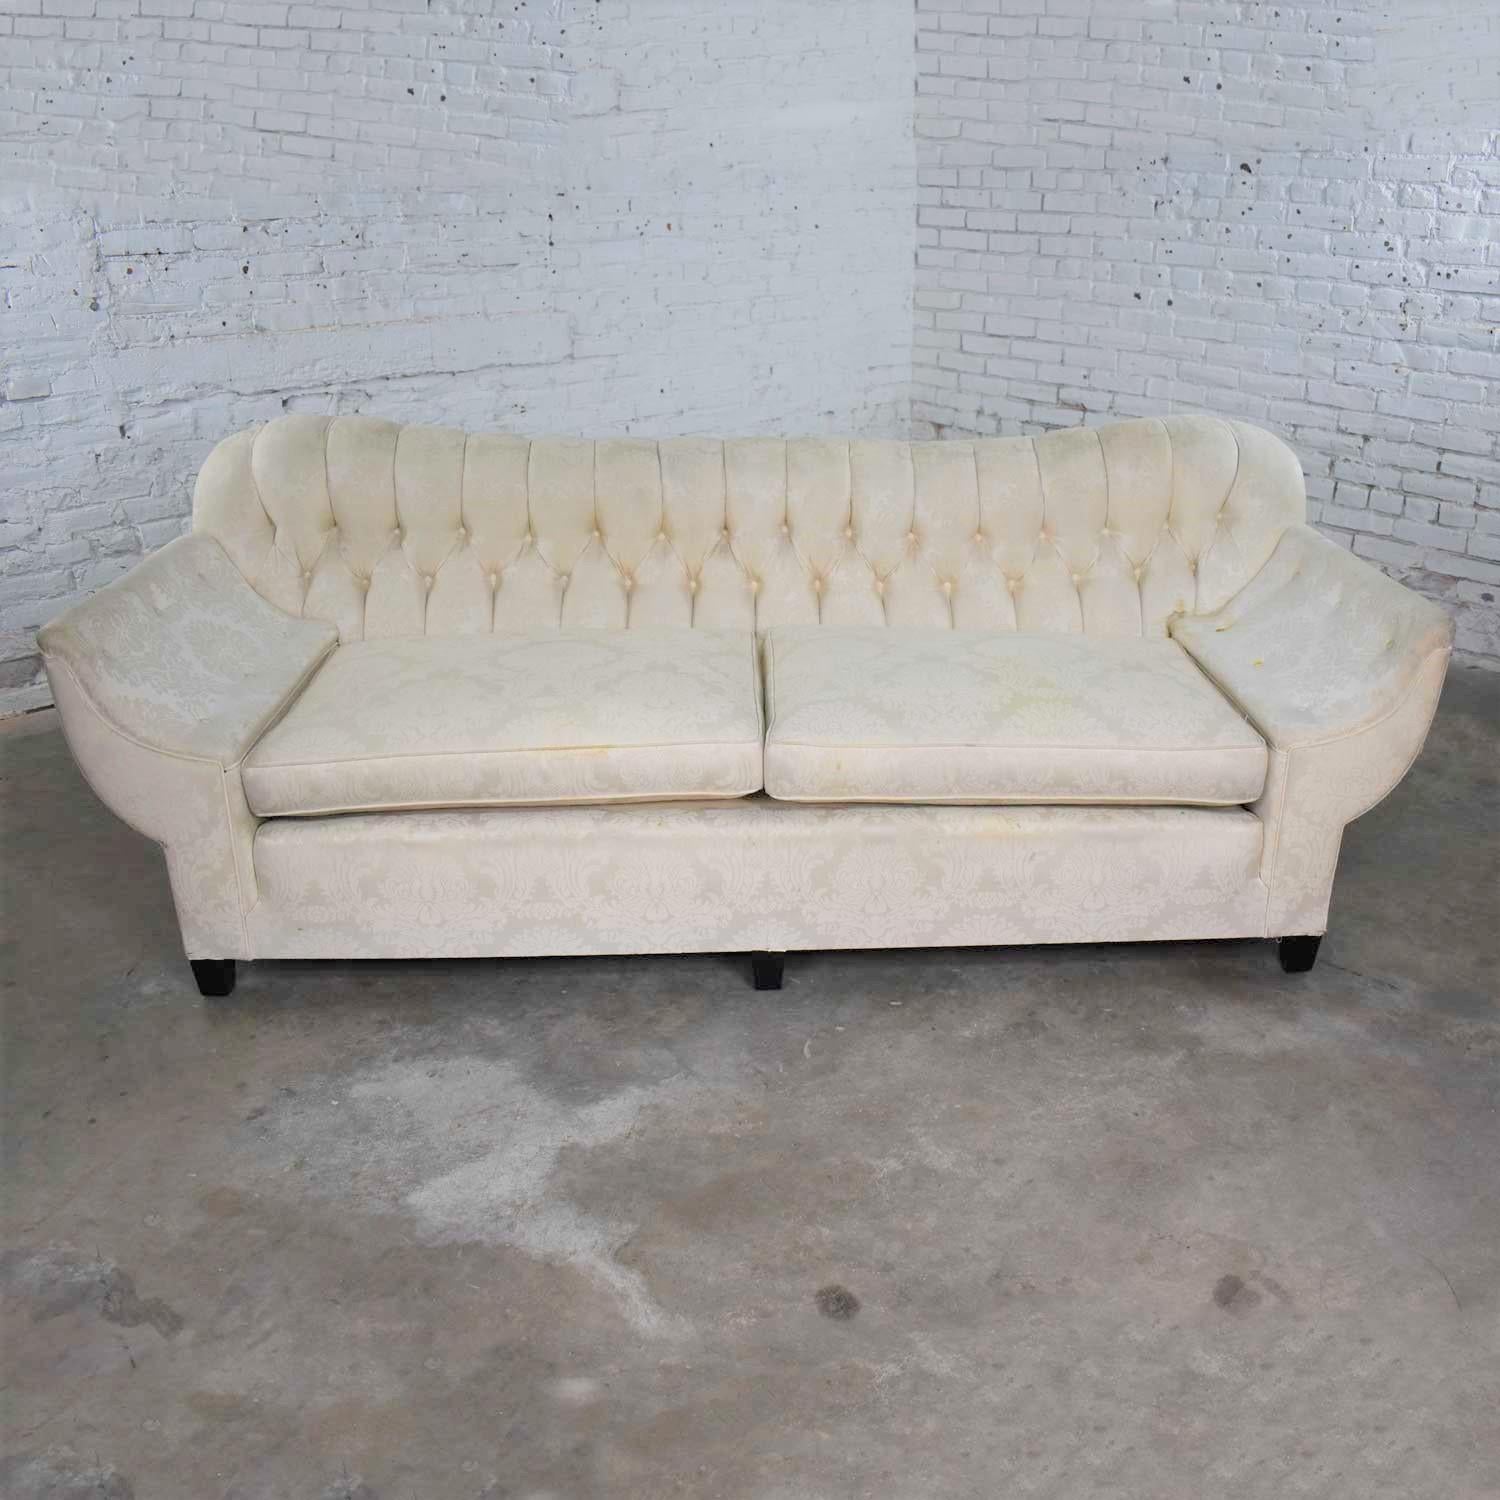 Vintage Art Deco Hollywood Regency Sofa Tufted Back and Concave Pillowed Arms For Sale 9